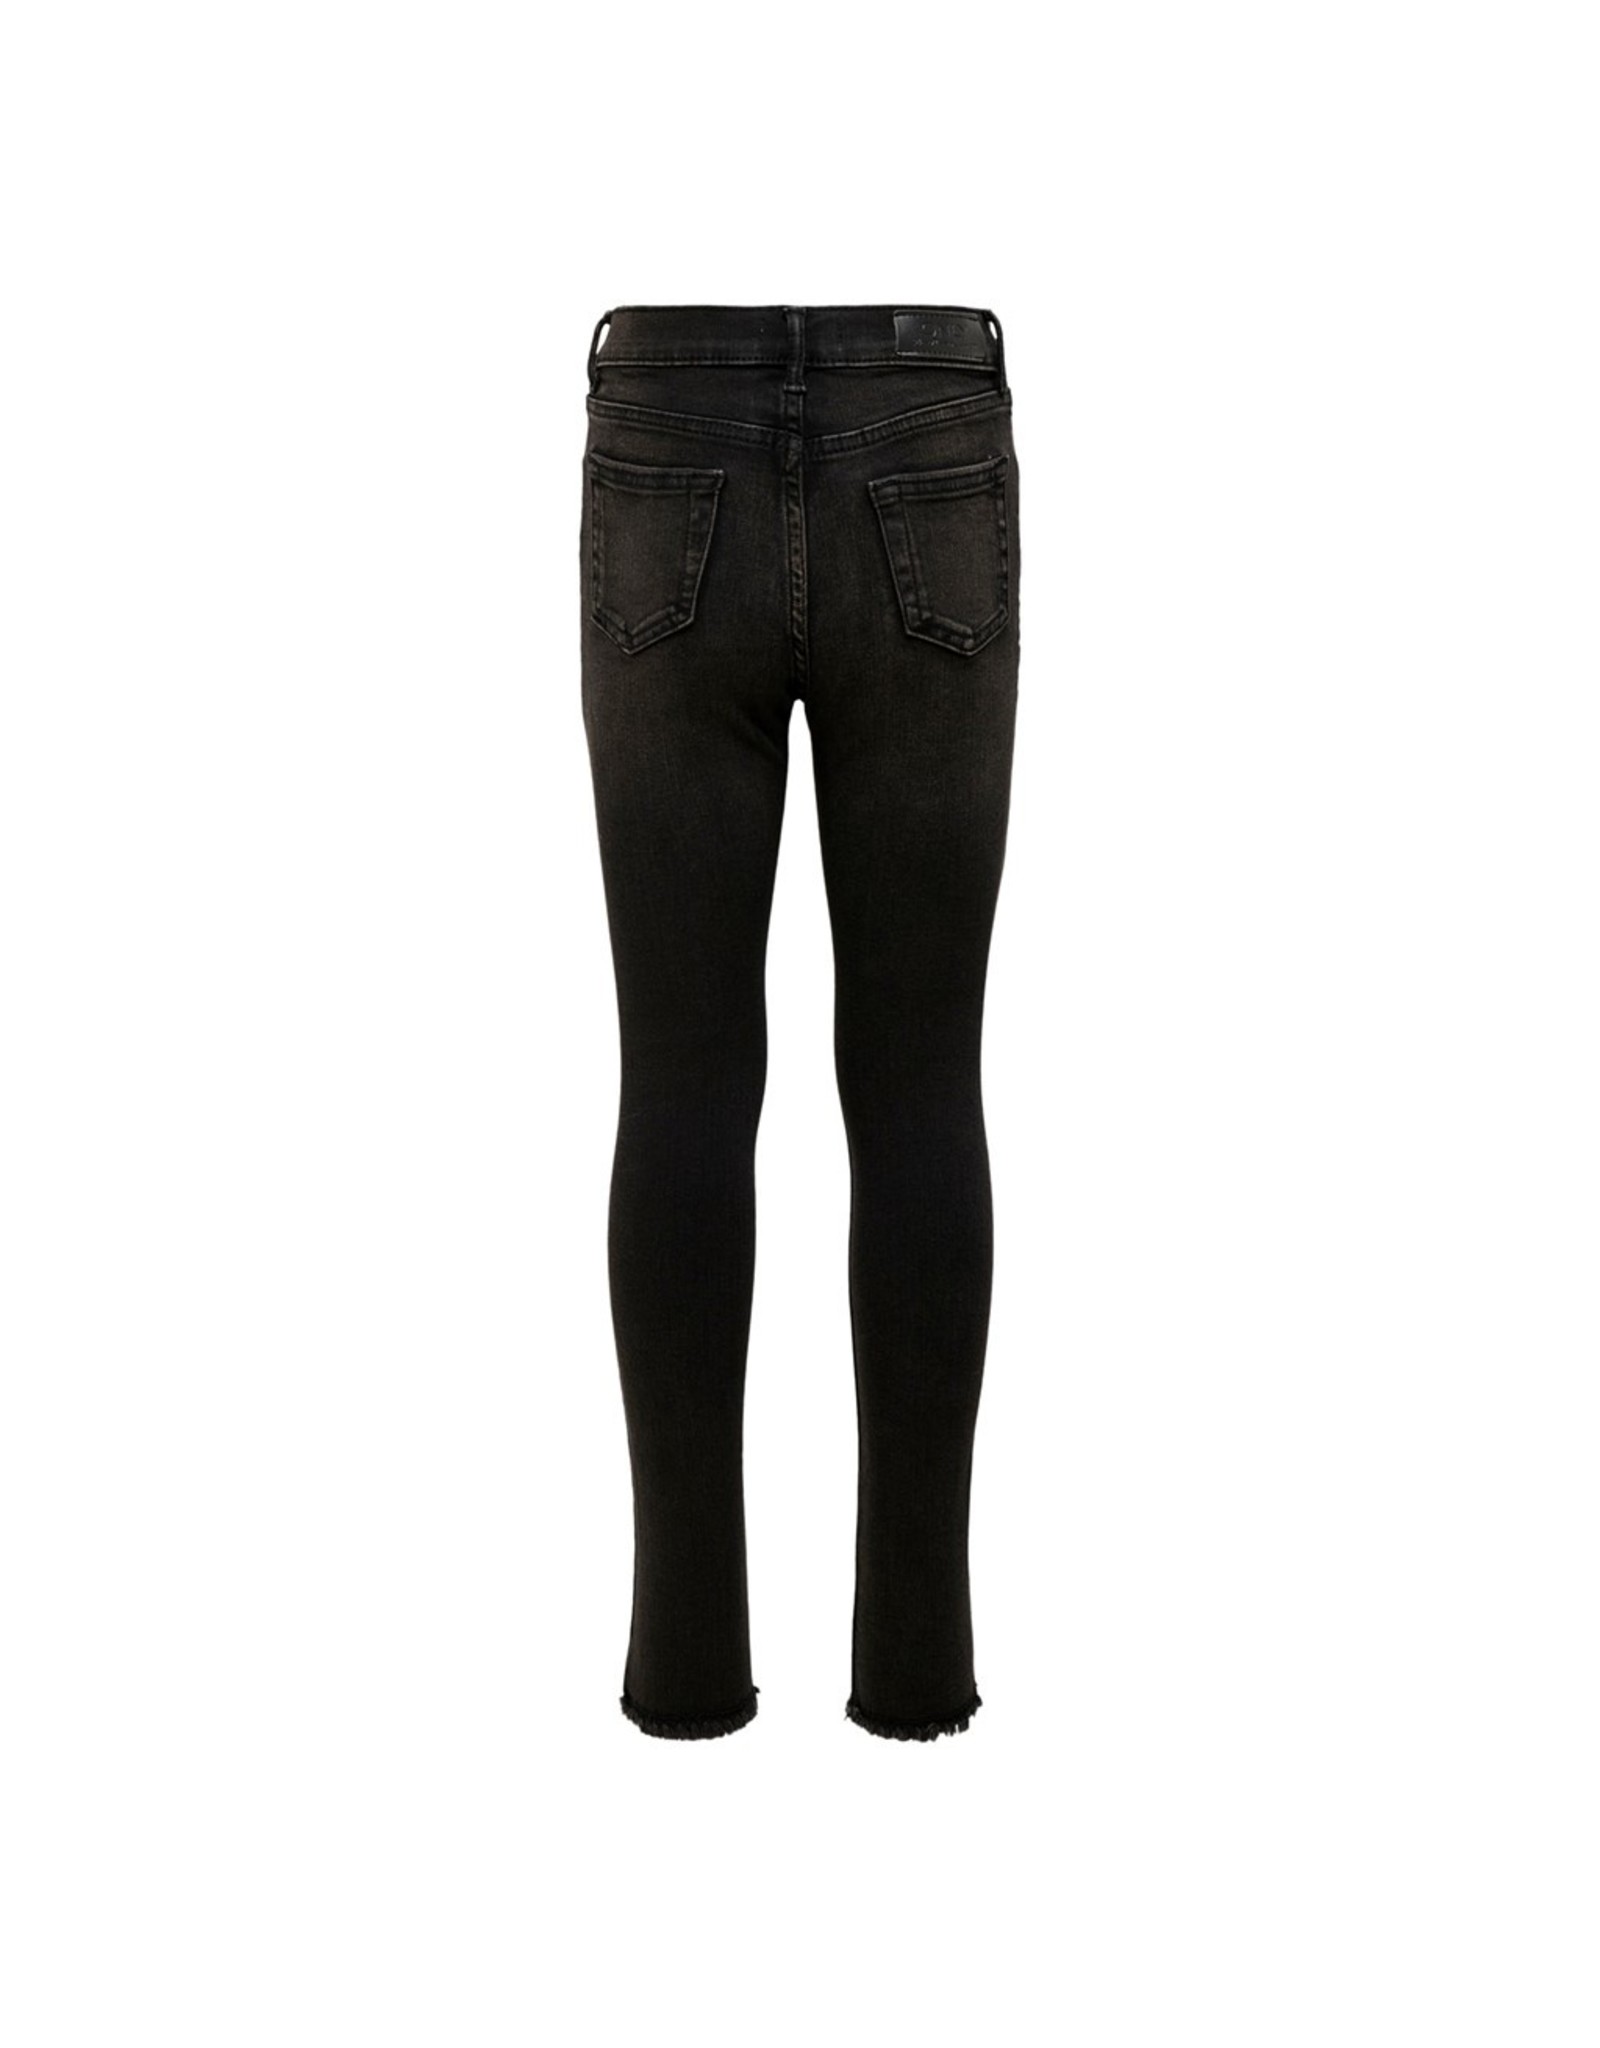 ONLY ONLY skinny jeans NOOS  Blush black